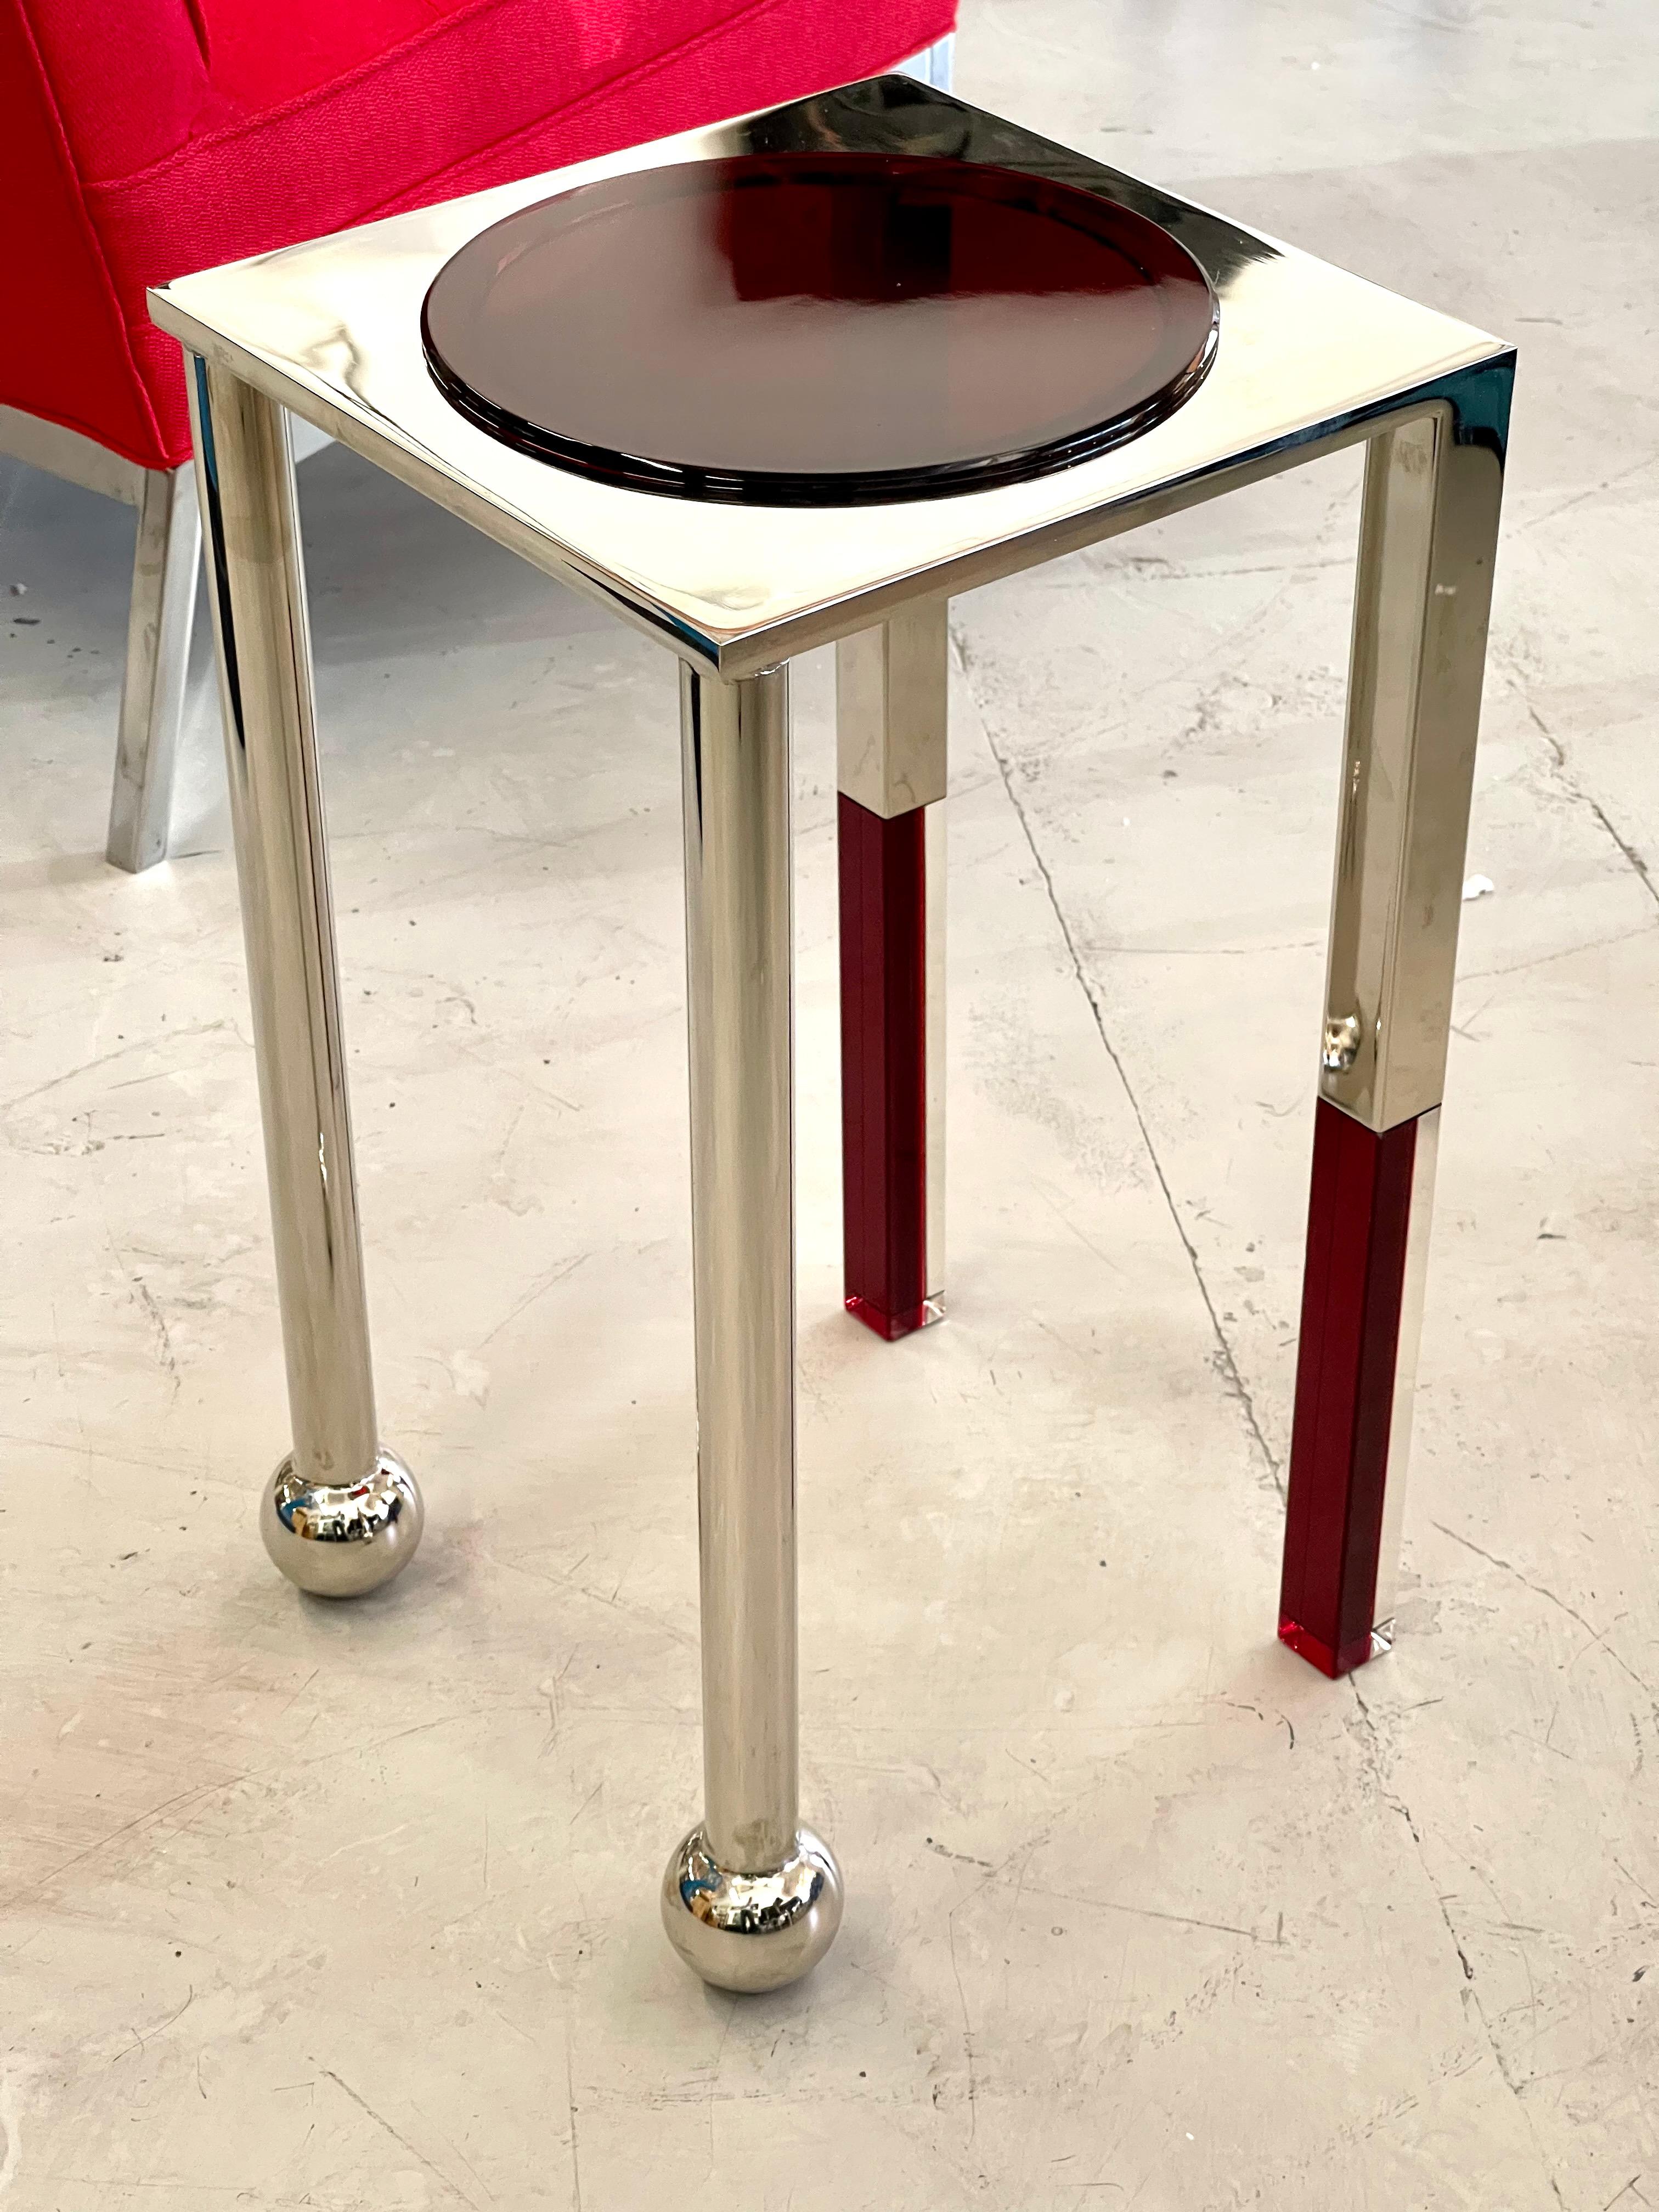 A sculptural table in red and clear acrylic by Charles Hollis Jones. It is one of two new designs by the noted designer. Please see the companion in blue and clear. These has nickel plated finishes and are 21 inches tall and 12 inches square. In